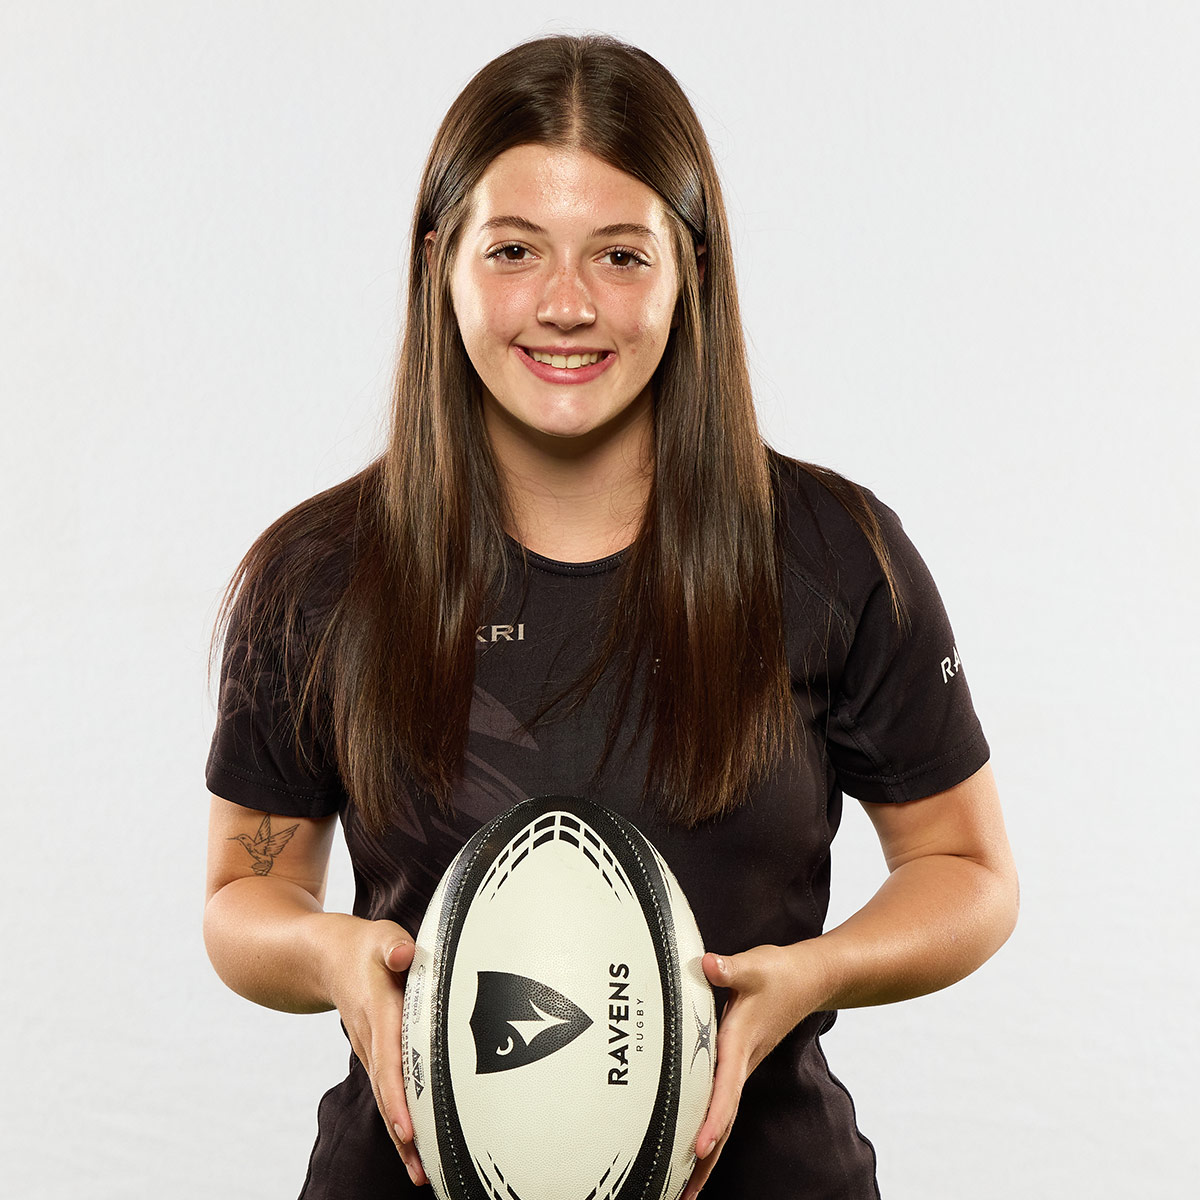 A rugby player holds a rugby ball while posing for a picture.